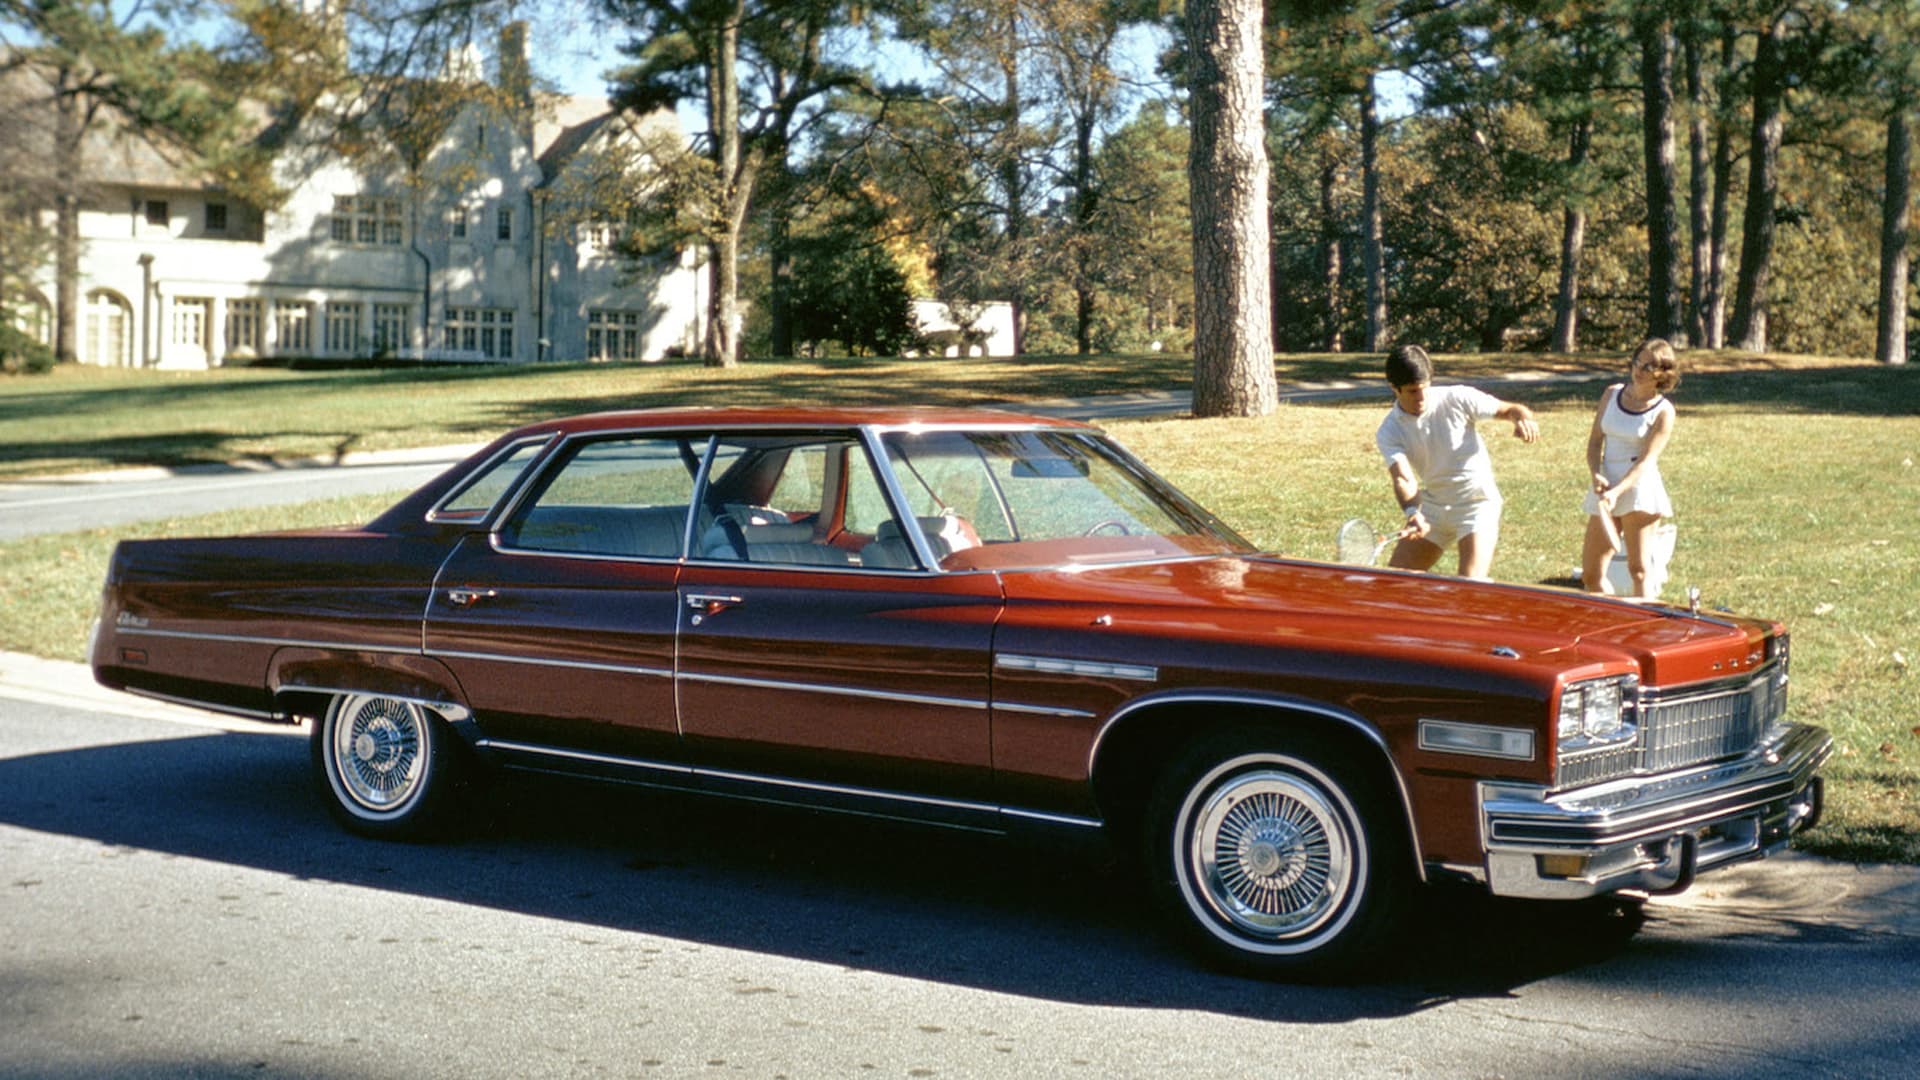 1974 Buick Electra 225